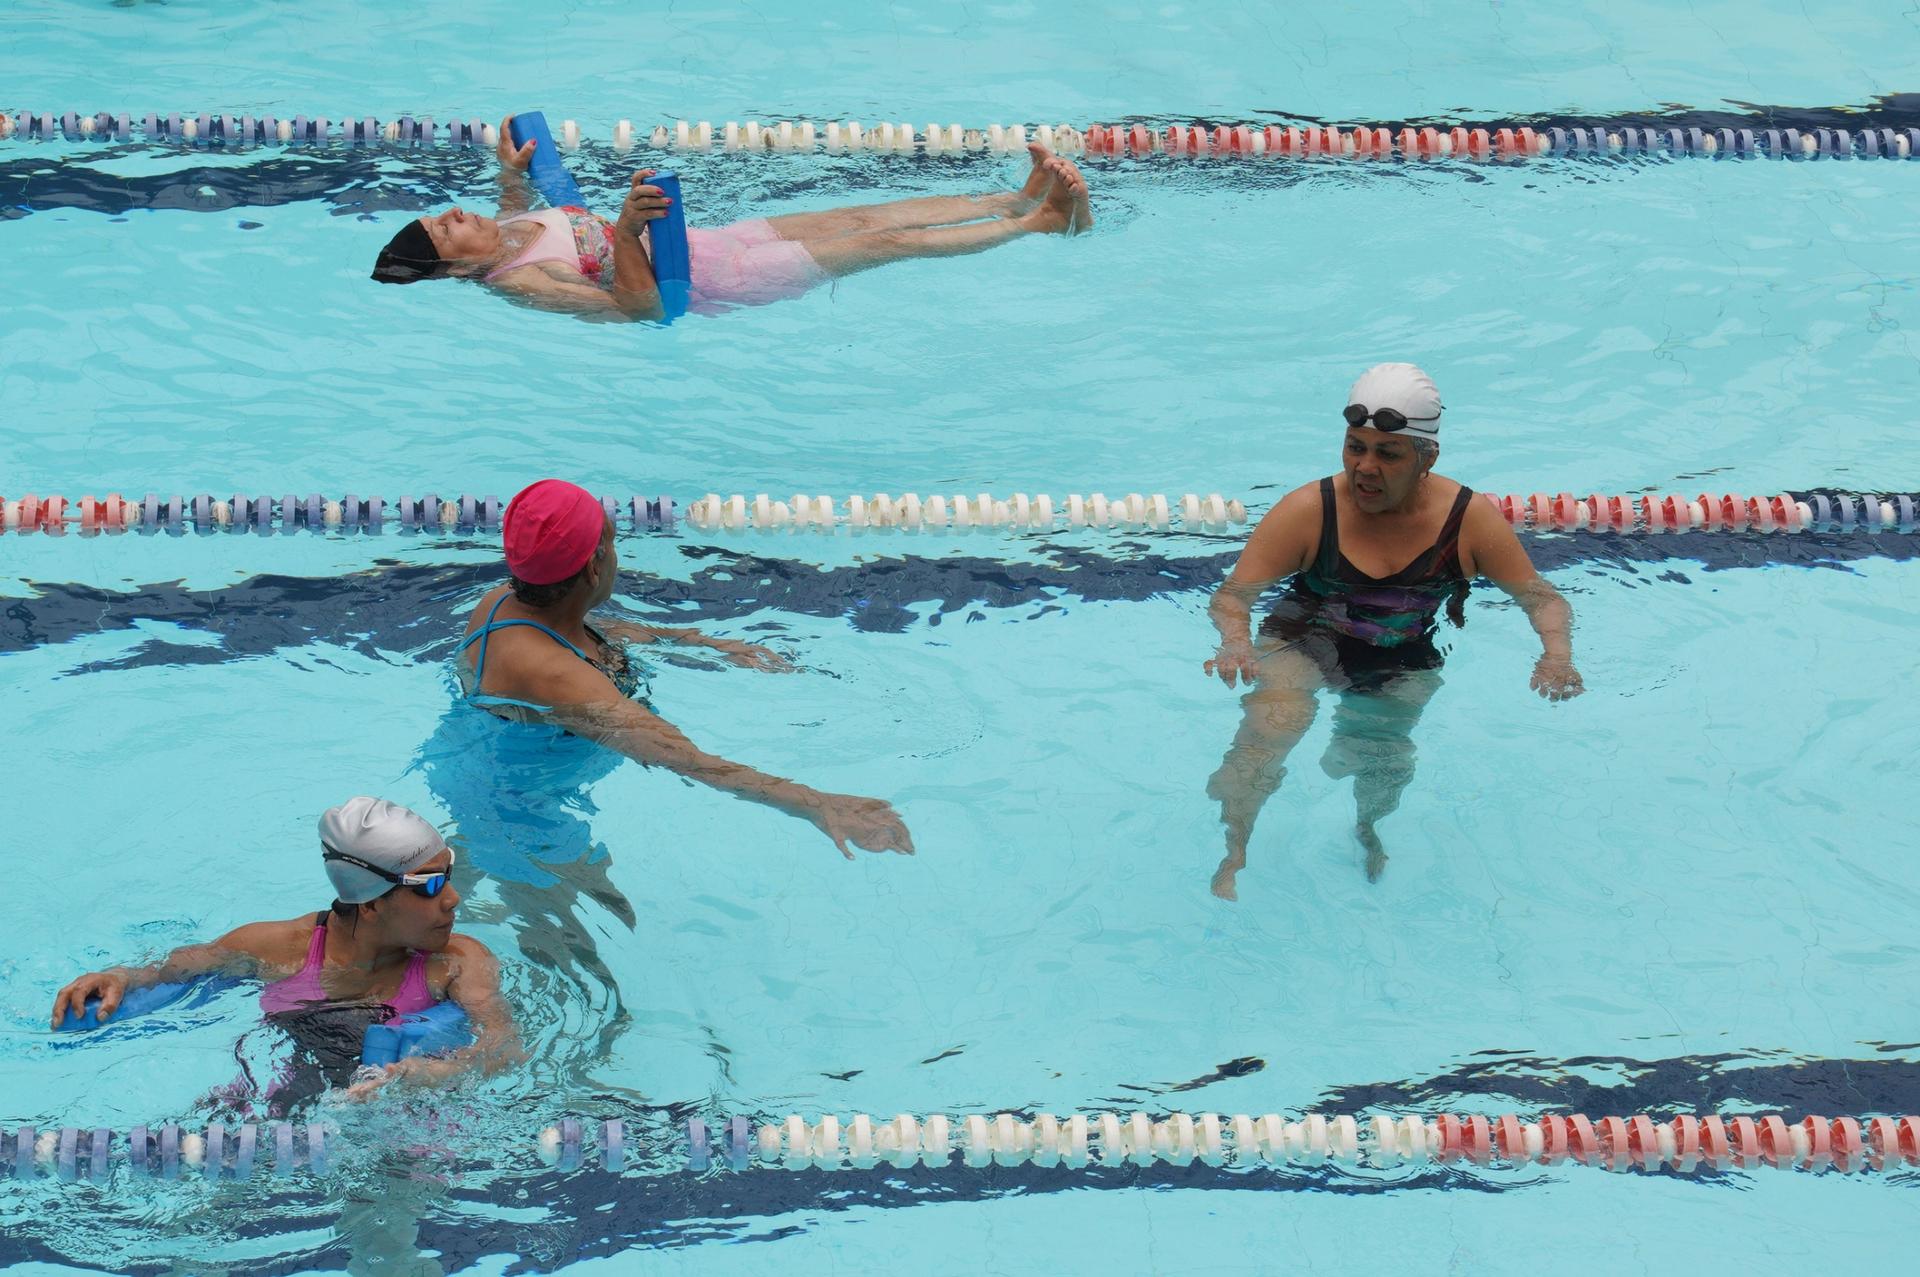 While their laundry is being washed and the kids are taken care of women can participate in different activities at Bogotá's careblocks, including swimming lessons.